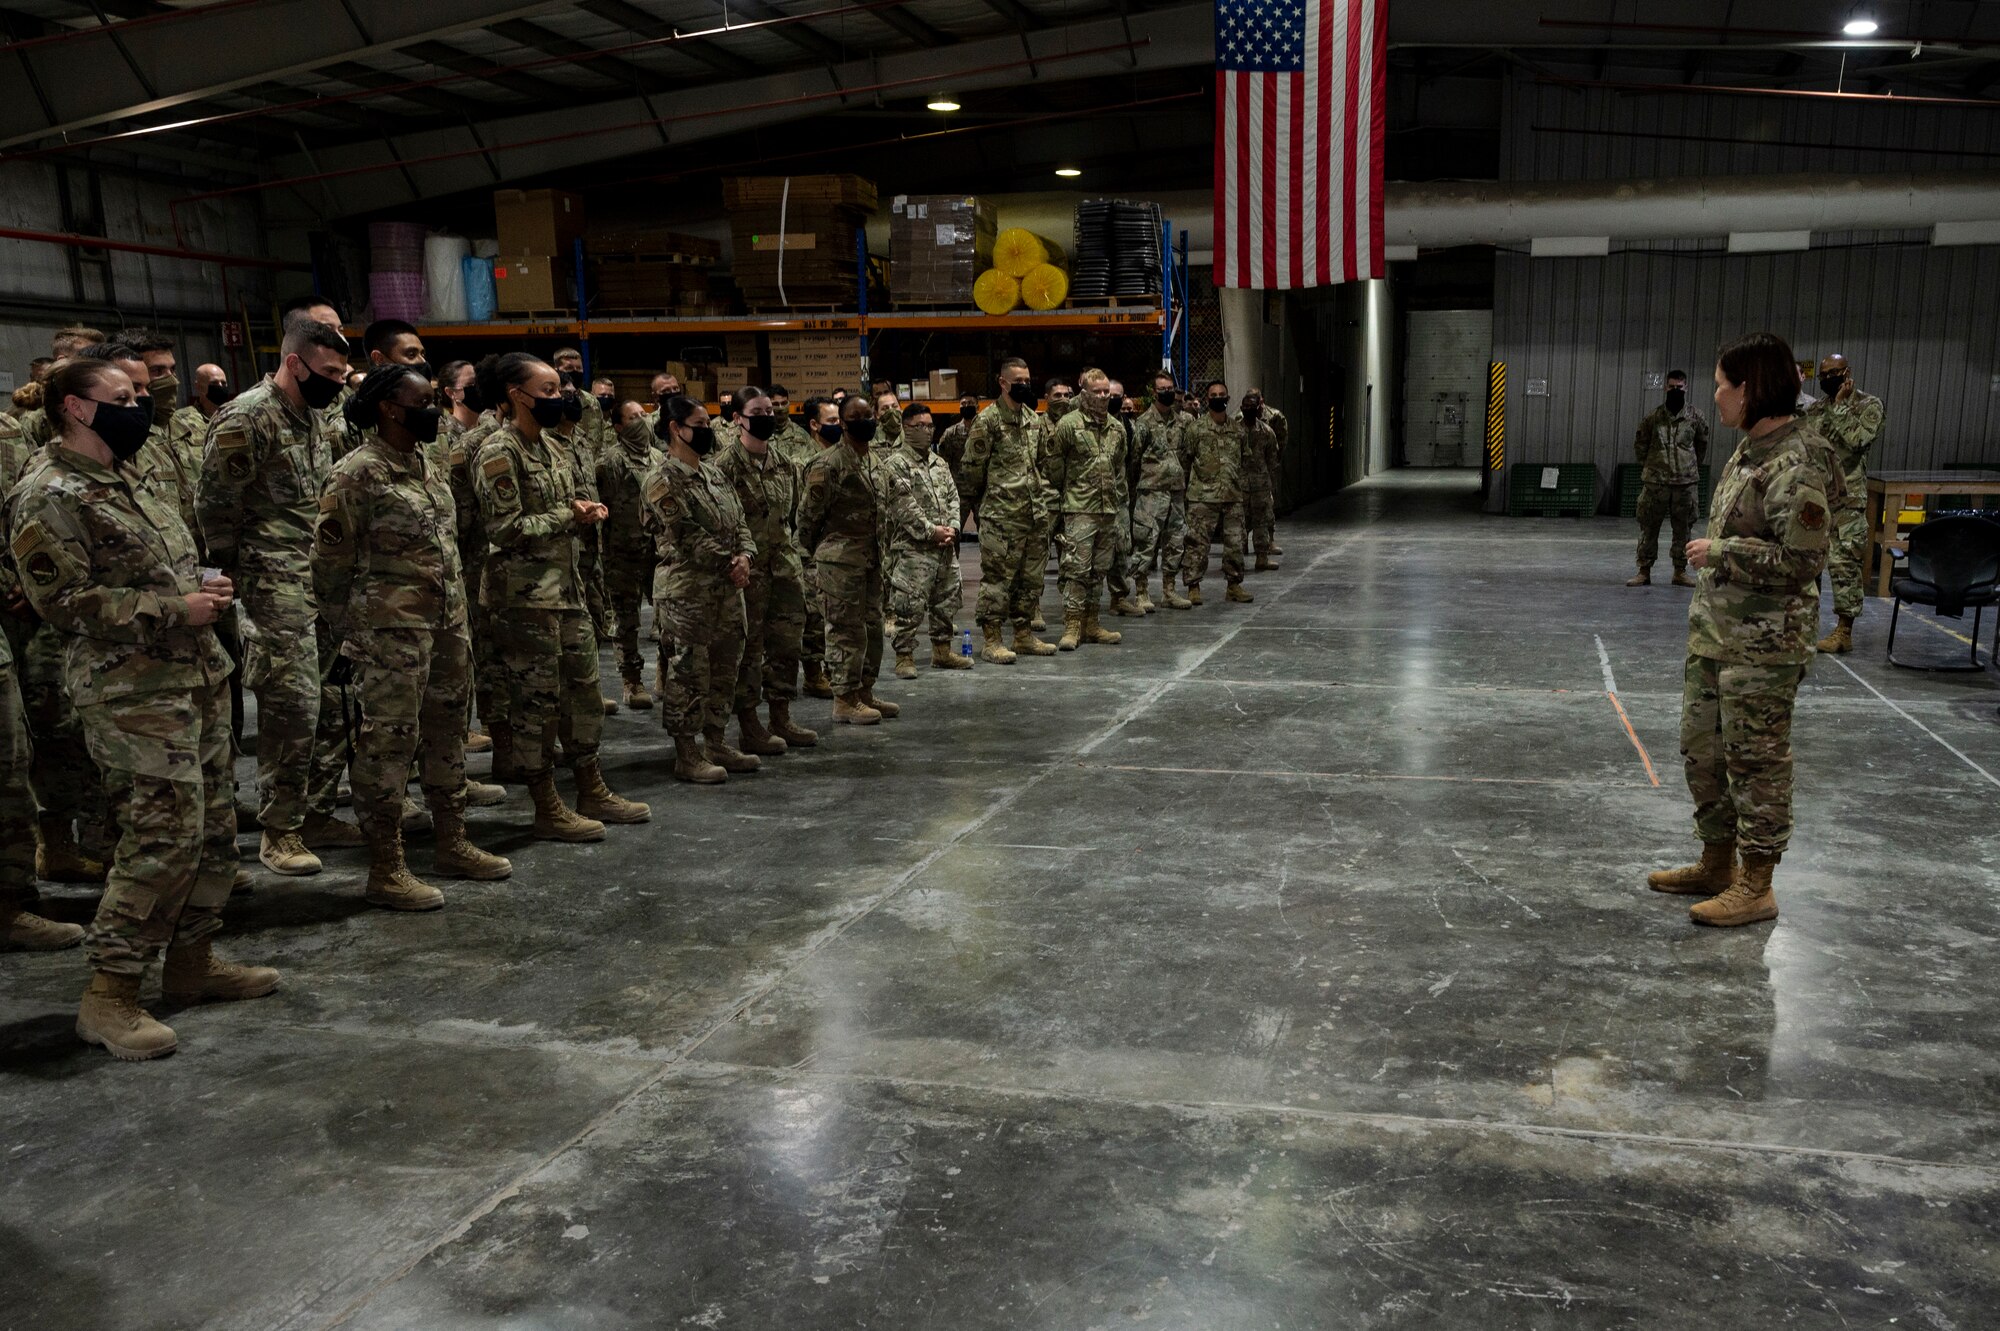 Chief Master Sgt. of the Air Force JoAnne S. Bass visits with Airmen assigned to the 380th Expeditionary Logistics Readiness Squadron (ELRS) at Al Dhafra Air Base, United Arab Emirates, Dec. 21, 2020.